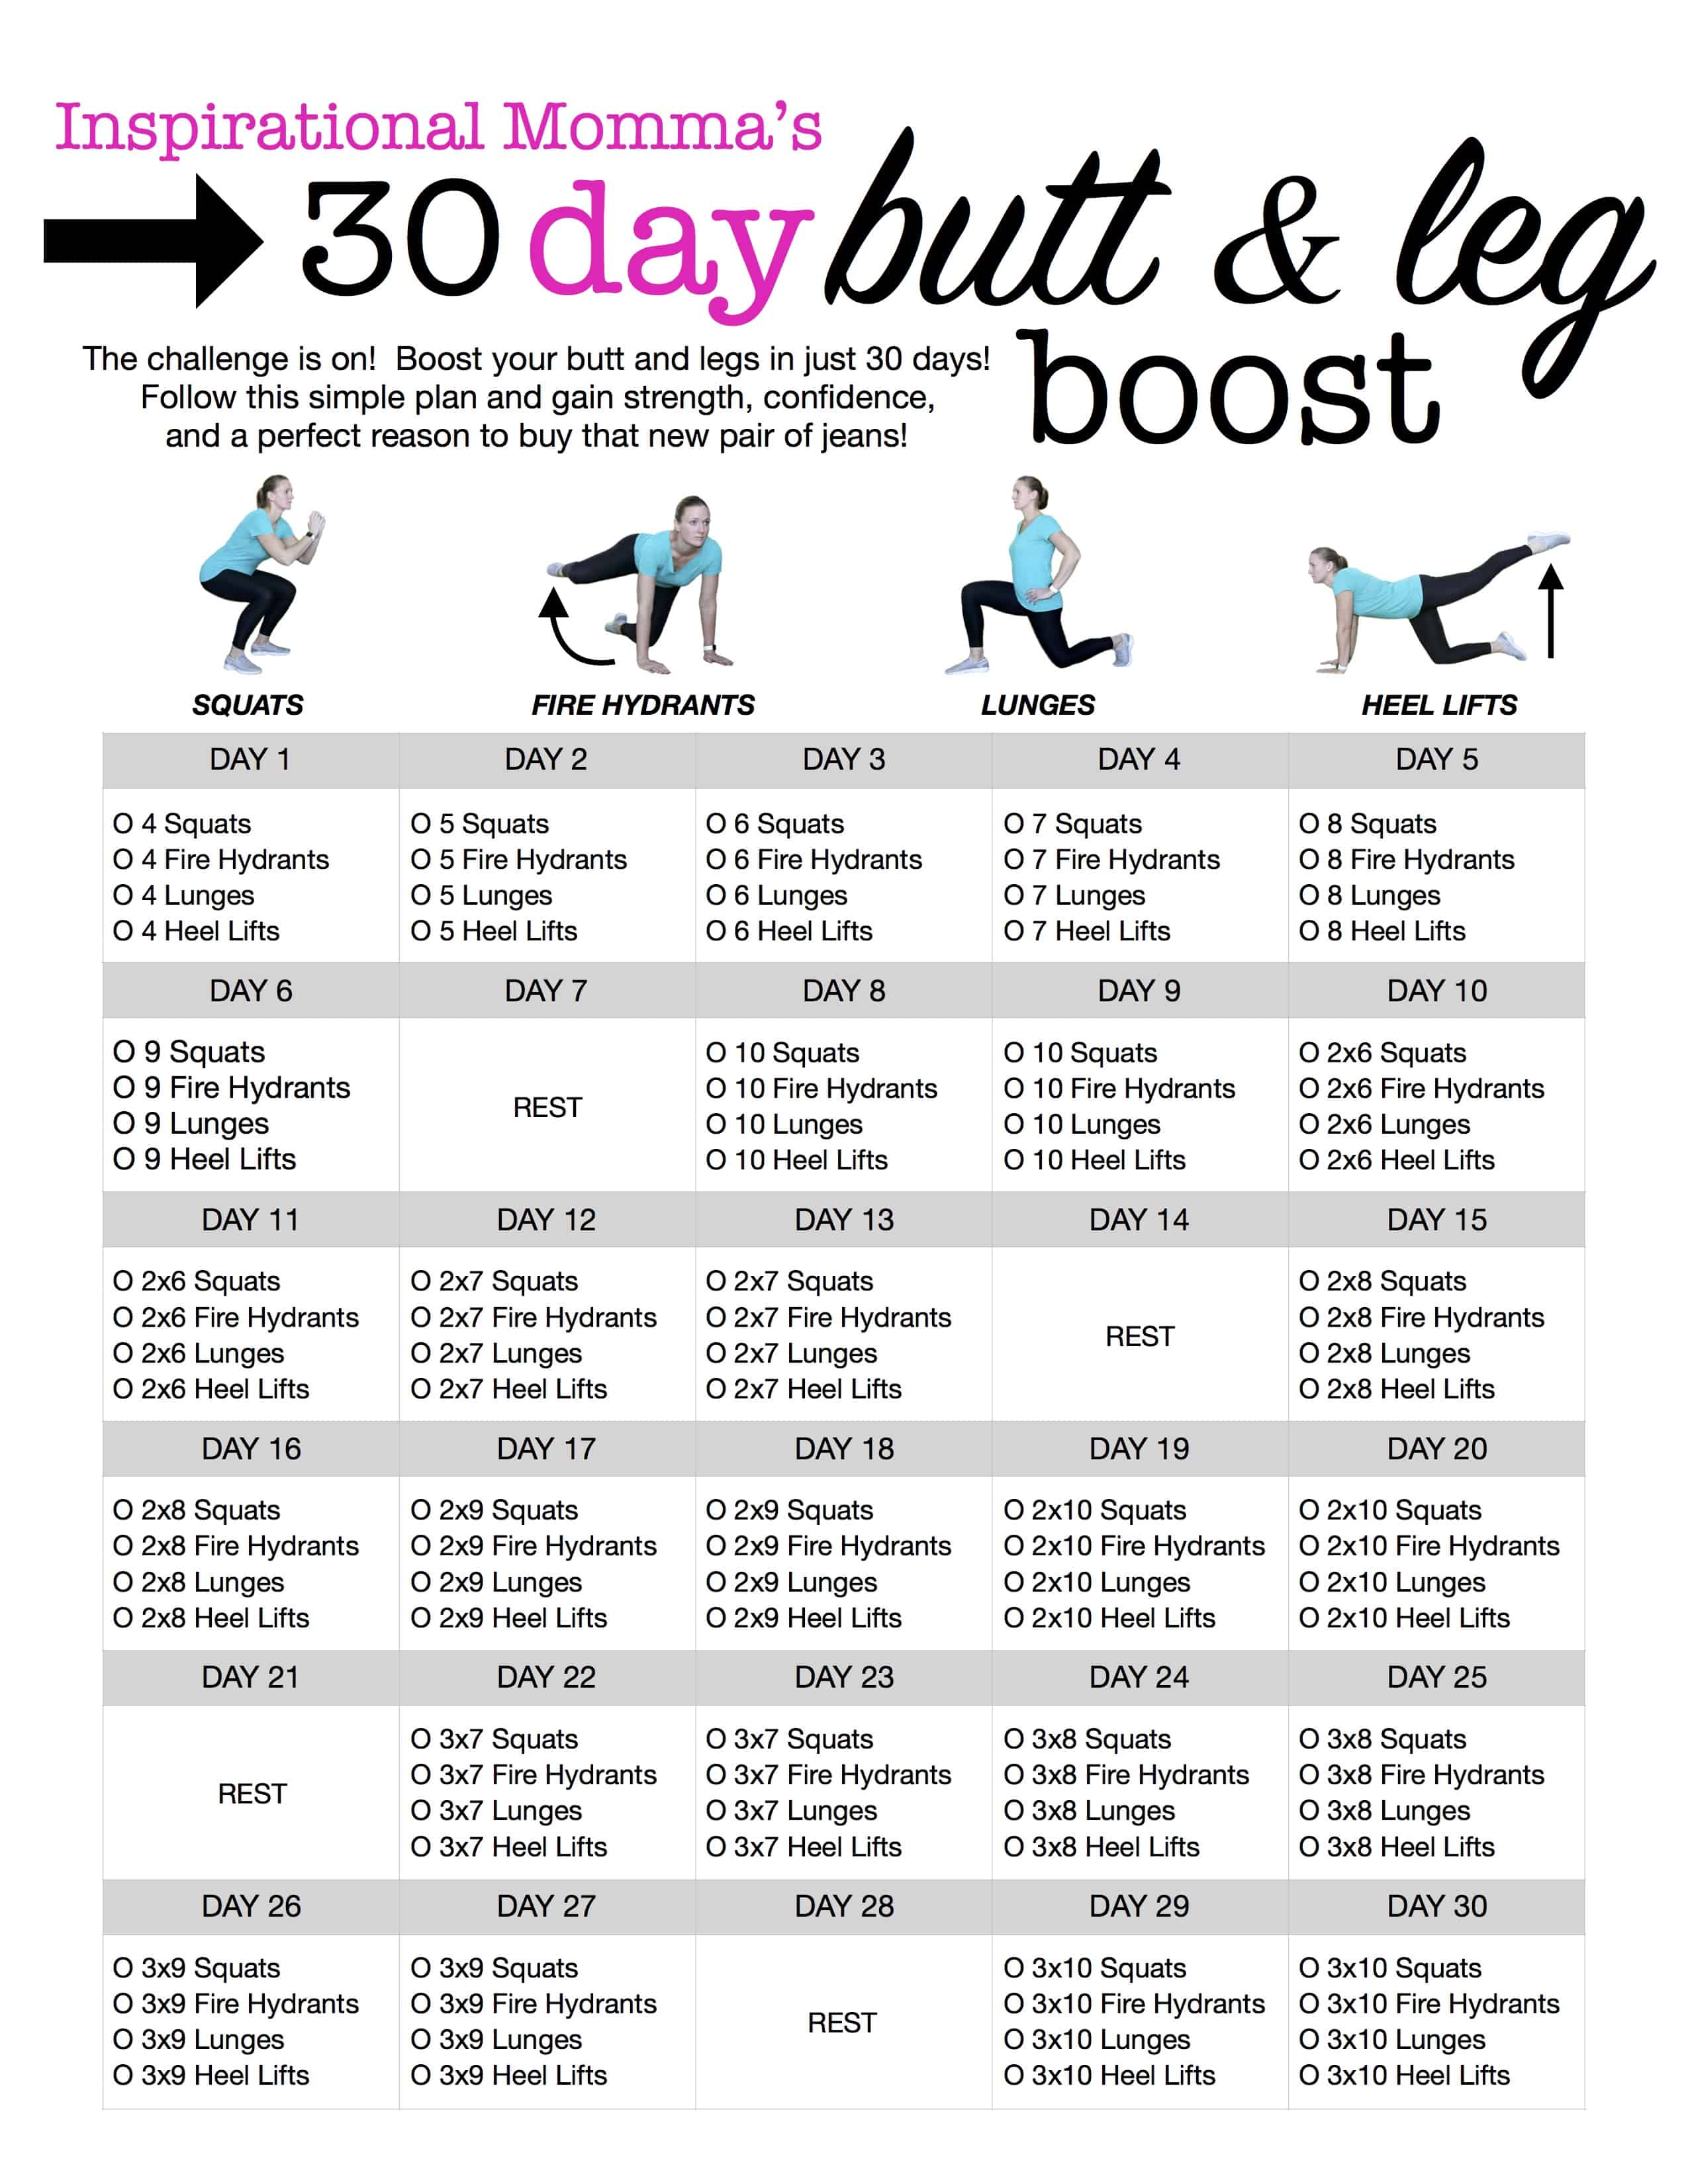 This 30-Day Workout Challenge Butt & Leg Boost is is just what you need to gain strength, confidence, and a perfect reason to buy that new pair of jeans!